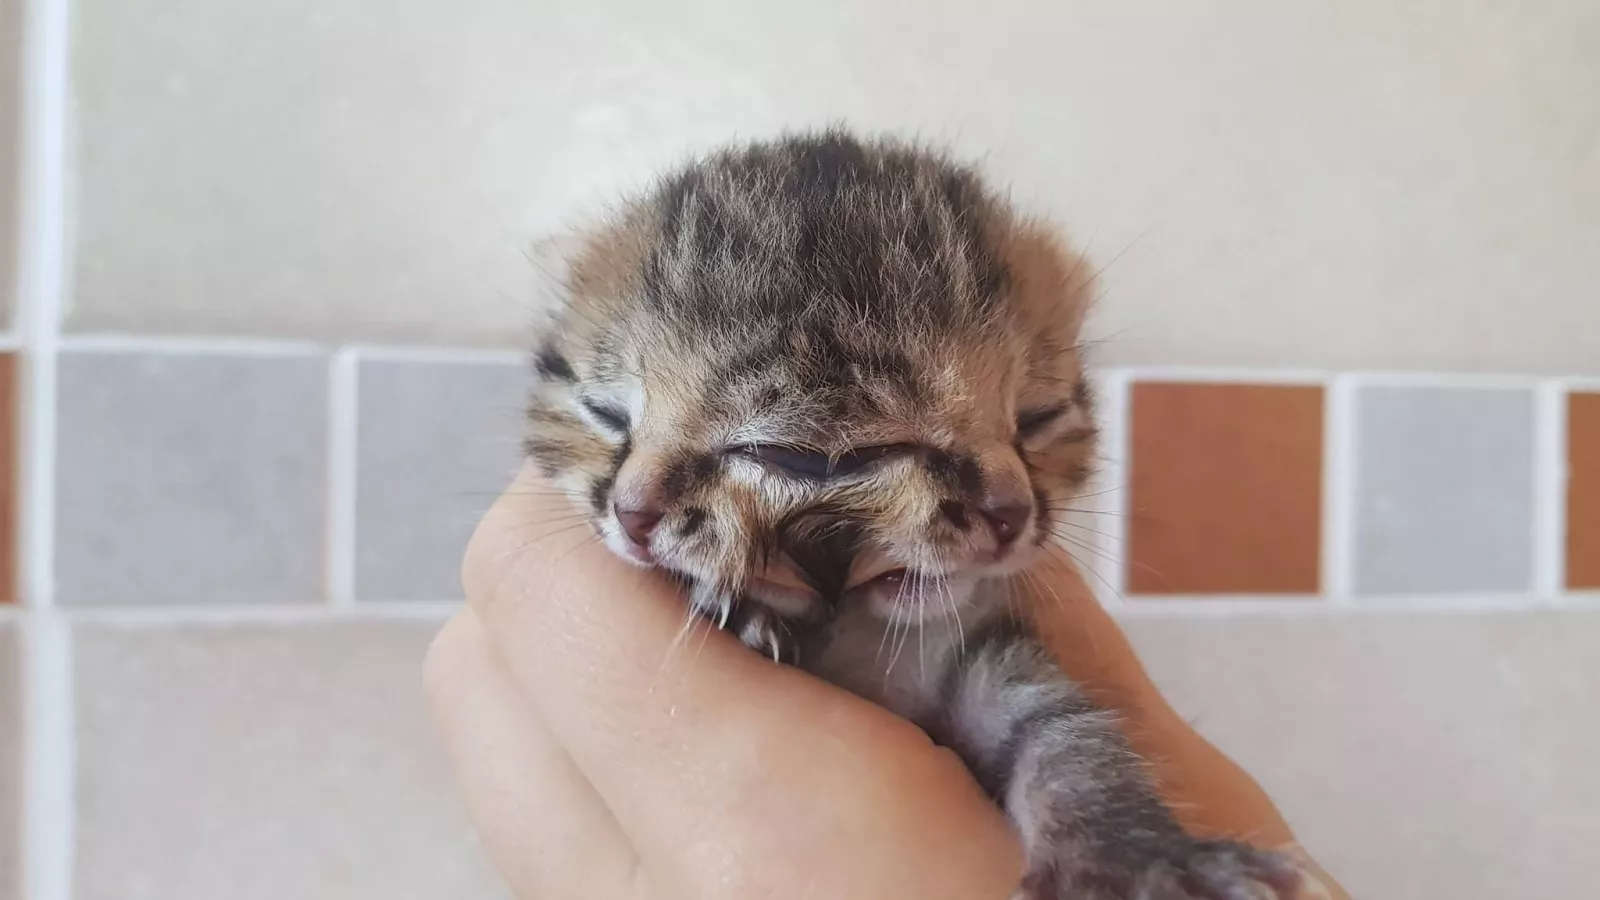 Photos: Kitten Born With Two Faces Is Surviving Against the Odds